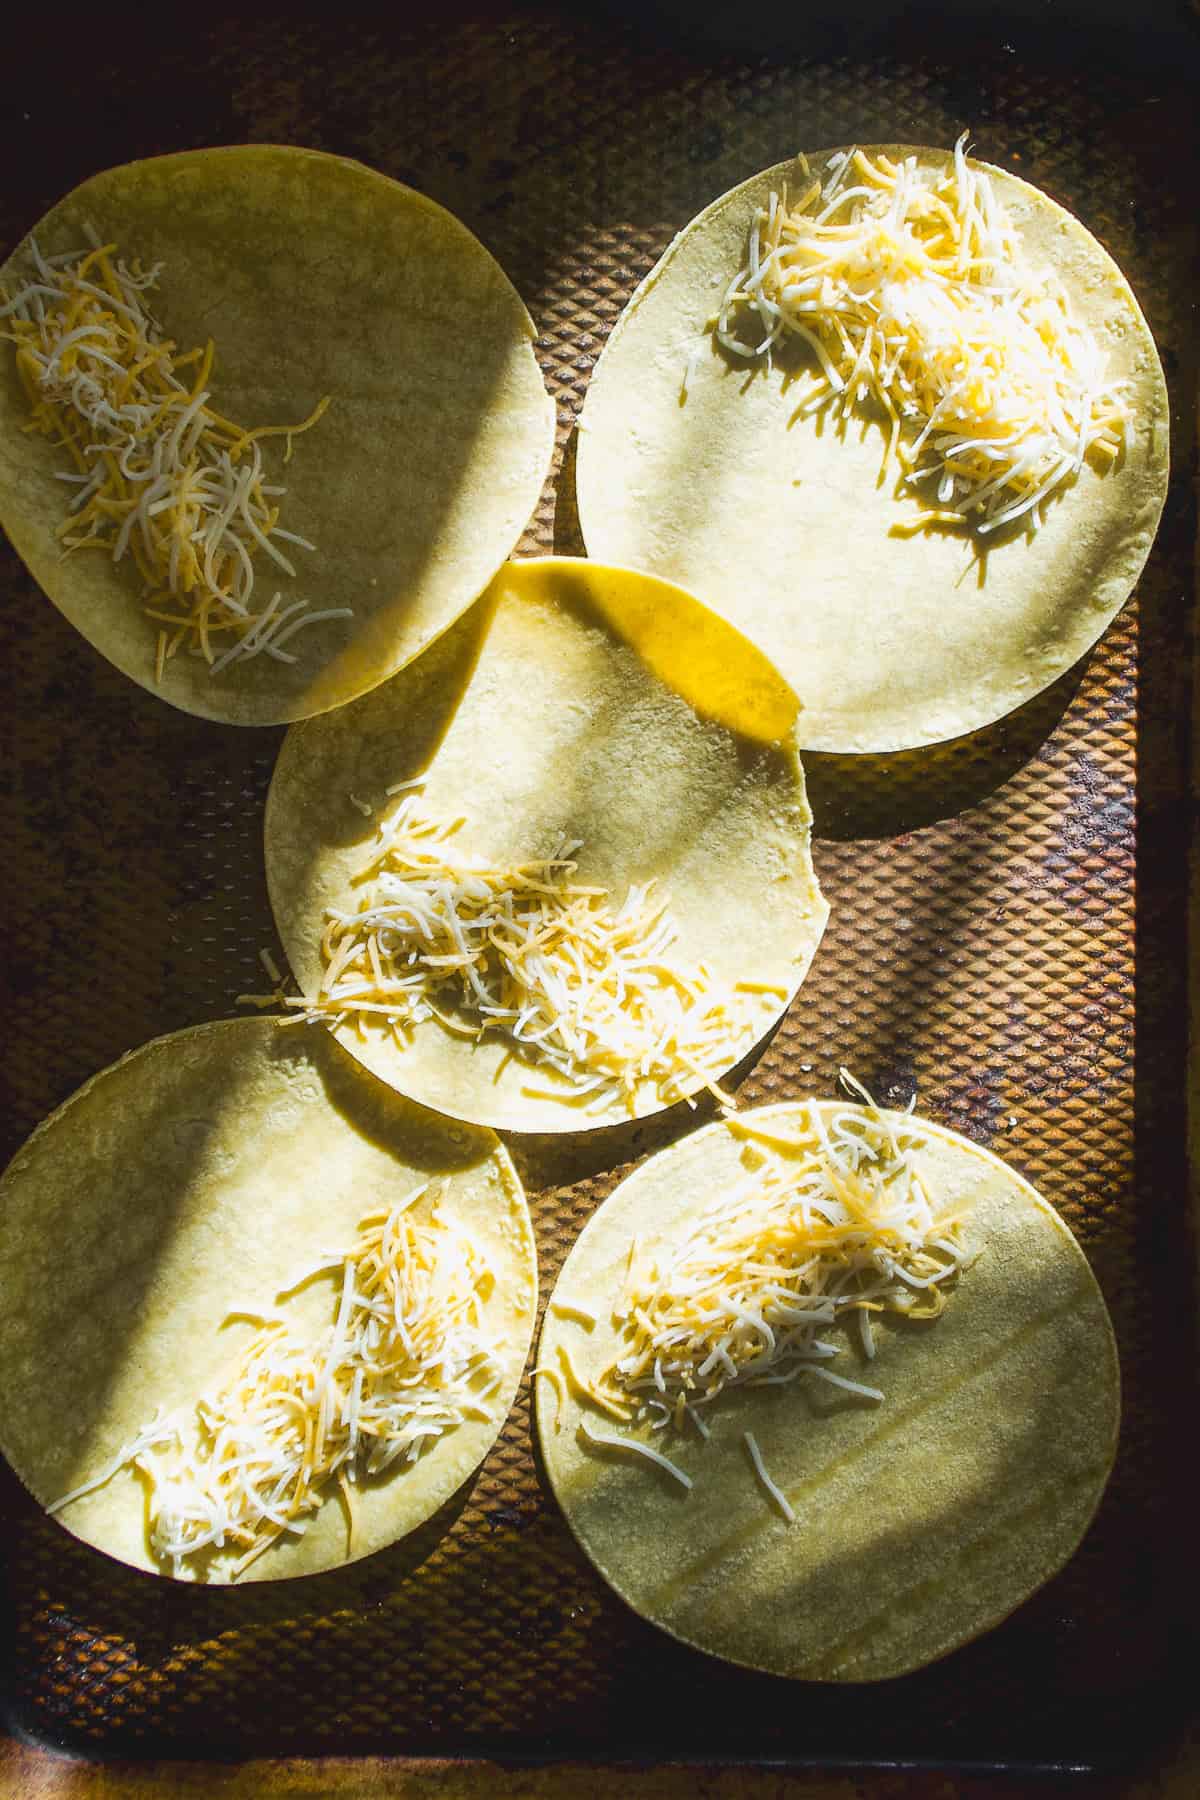 Tortillas spread out on a baking sheet with cheese on top about to be baked.